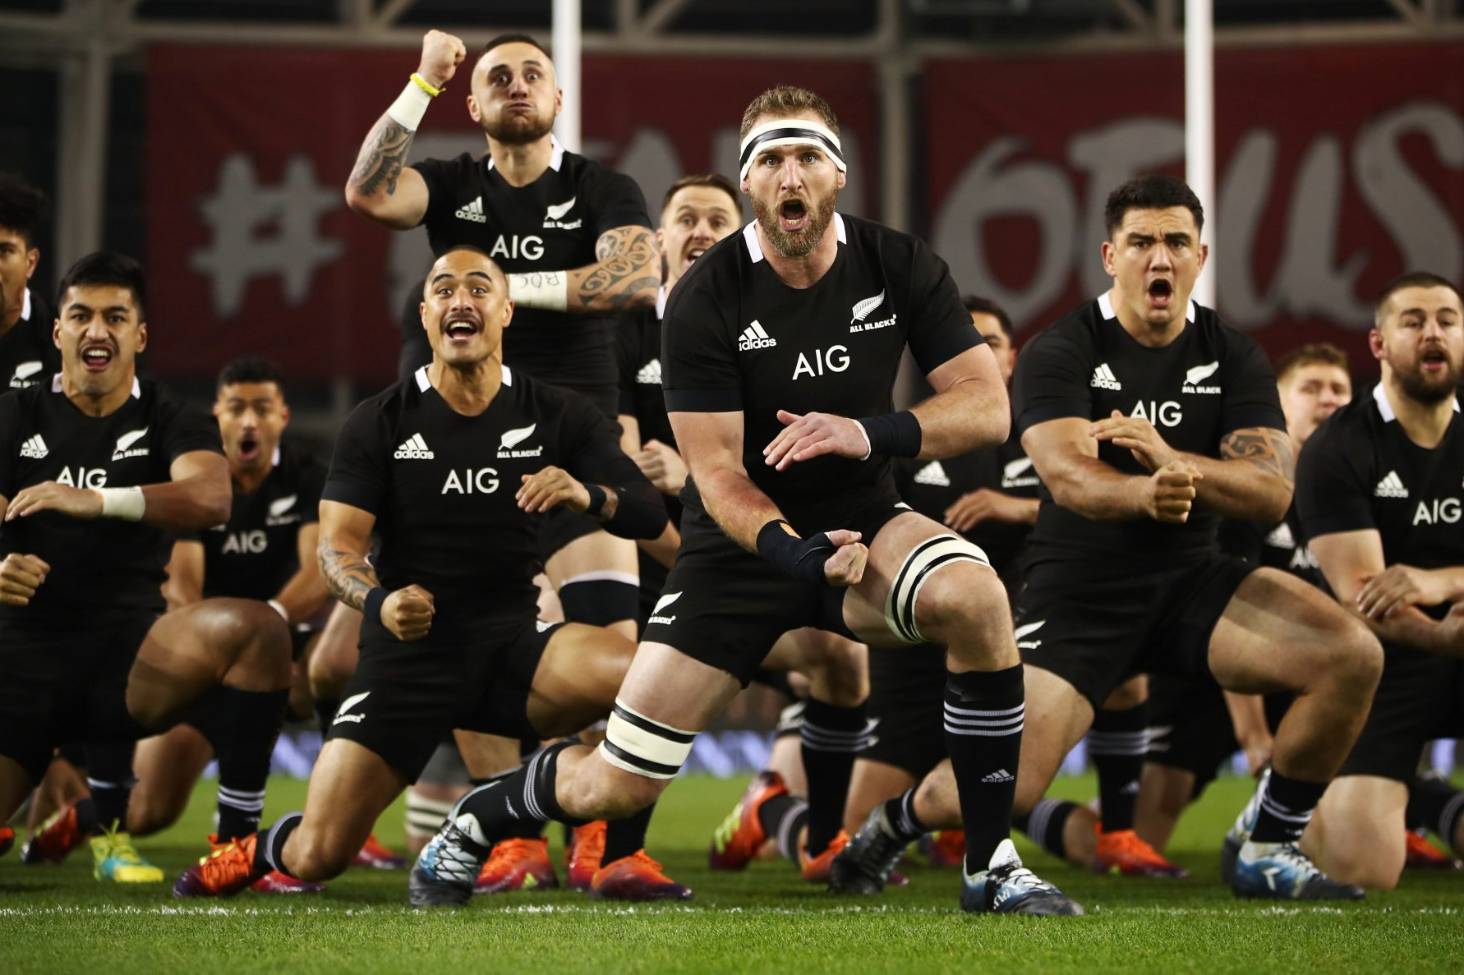 The Haka: Know Why New Zealand's Rugby Team Perform This Dance - Pragativadi